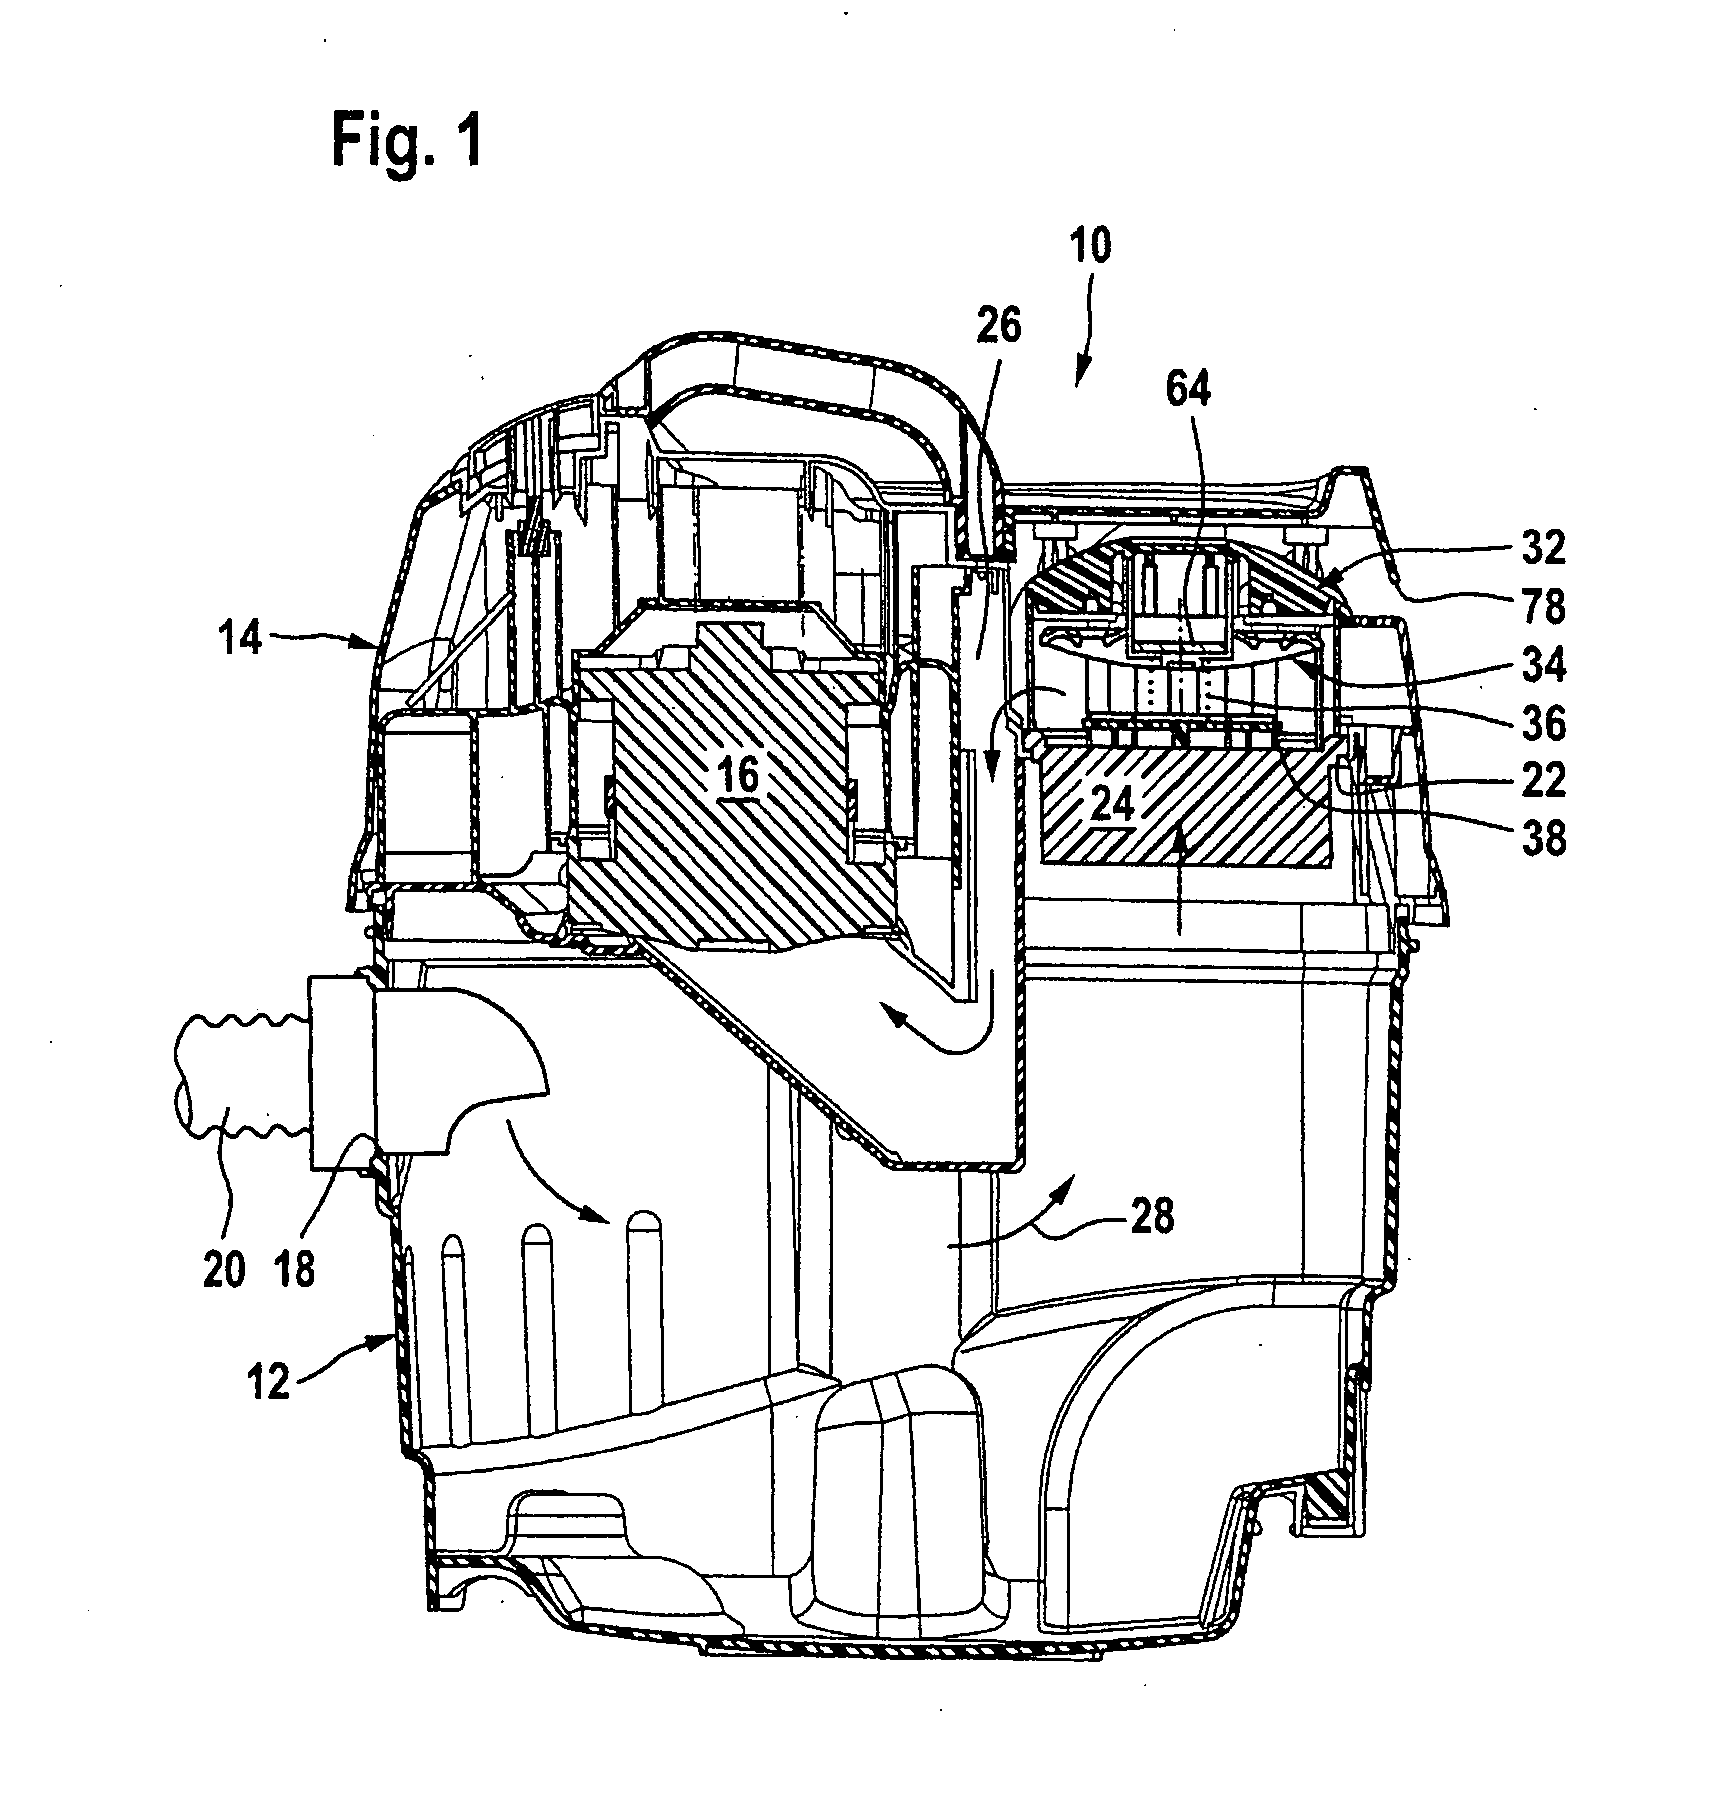 Method for cleaning the filters of a vacuum Cleaner and vacuum cleaner for carrying out said method